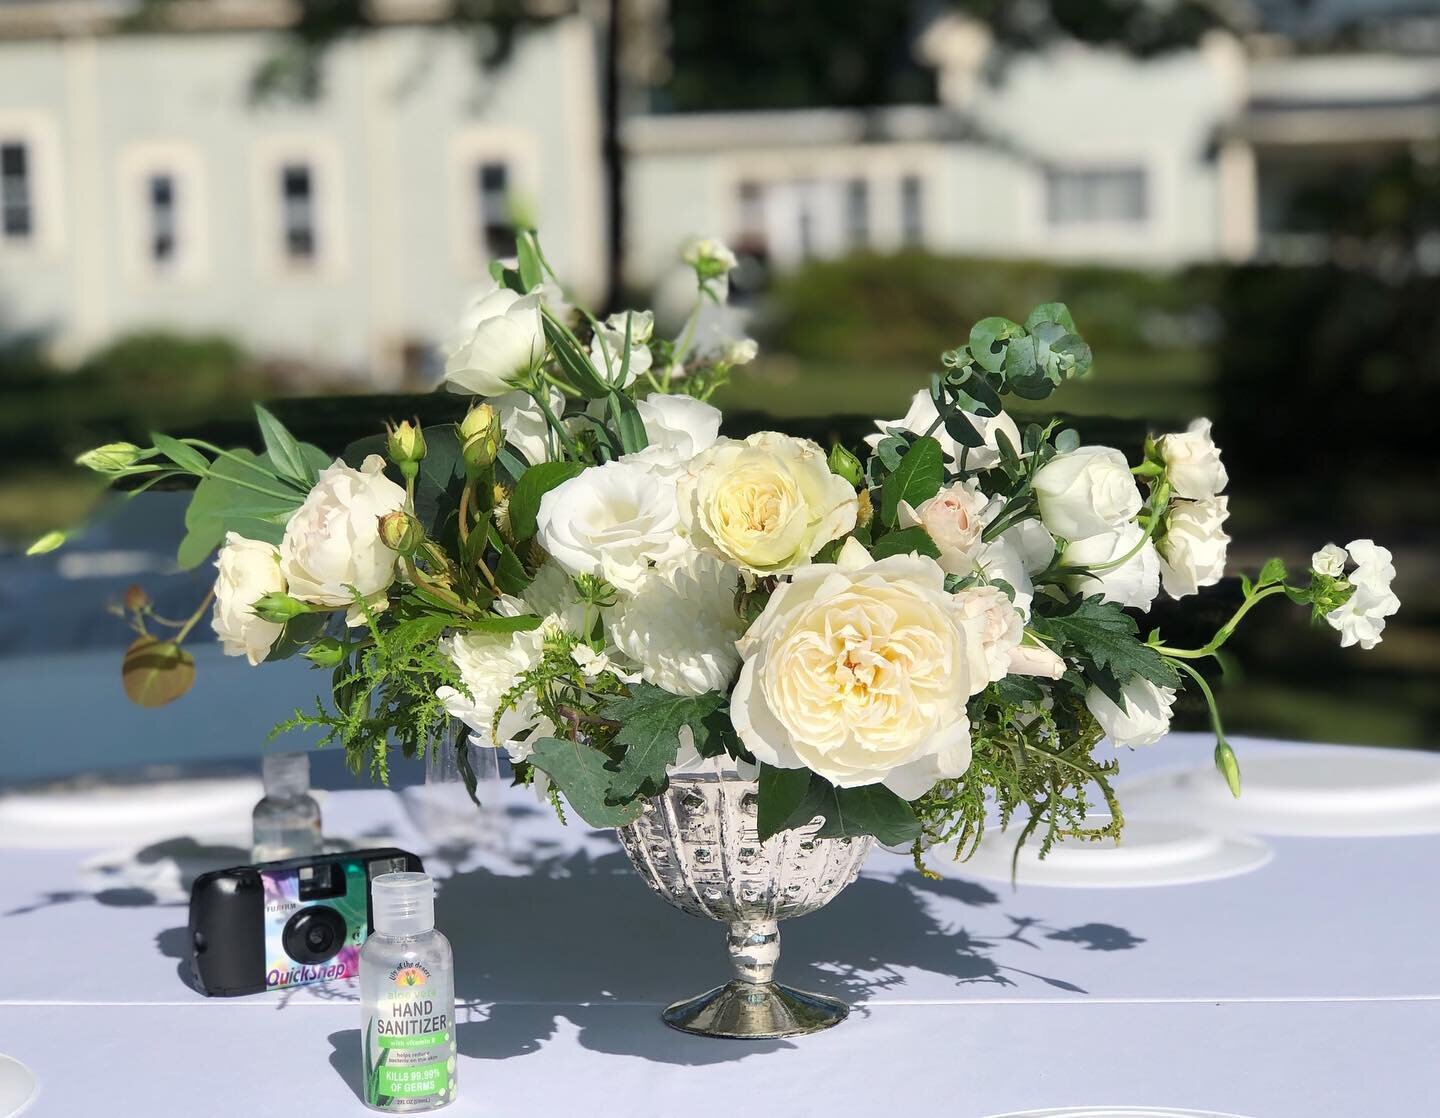 The beautiful green and white color palette for this wedding looked exquisite against the changing fall leaves of Massachusetts&rsquo;s this past weekend. 

Sourcing such beauty from flower farmers who grow their blooms with delicacy and care...
*Dah